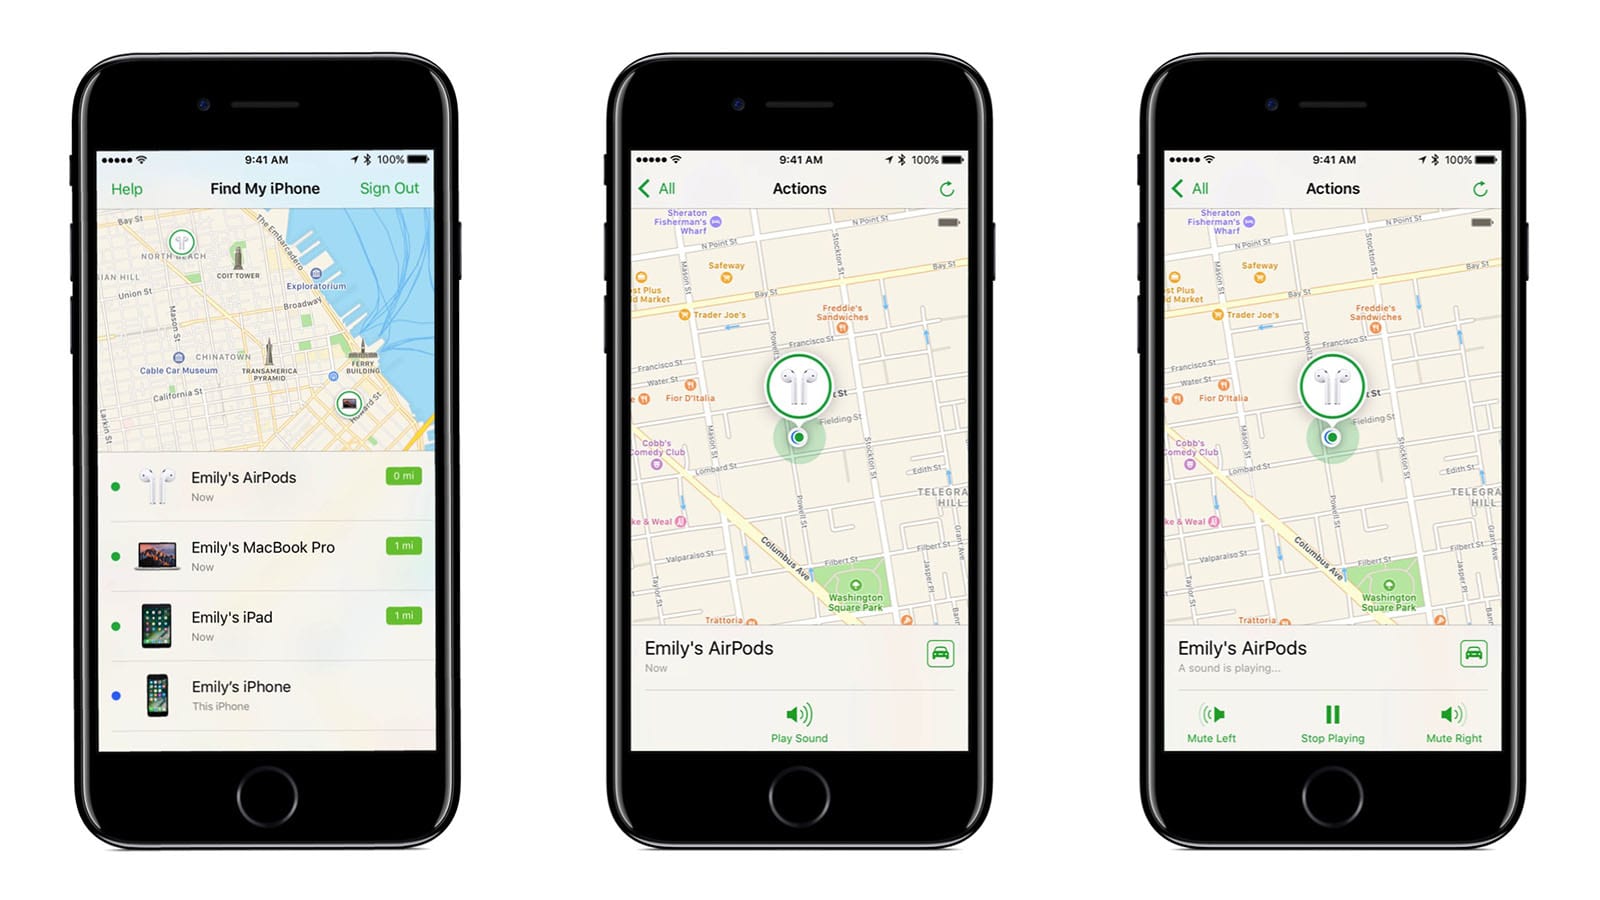 Apple's 'Find My iPhone' app will help you locate lost AirPods